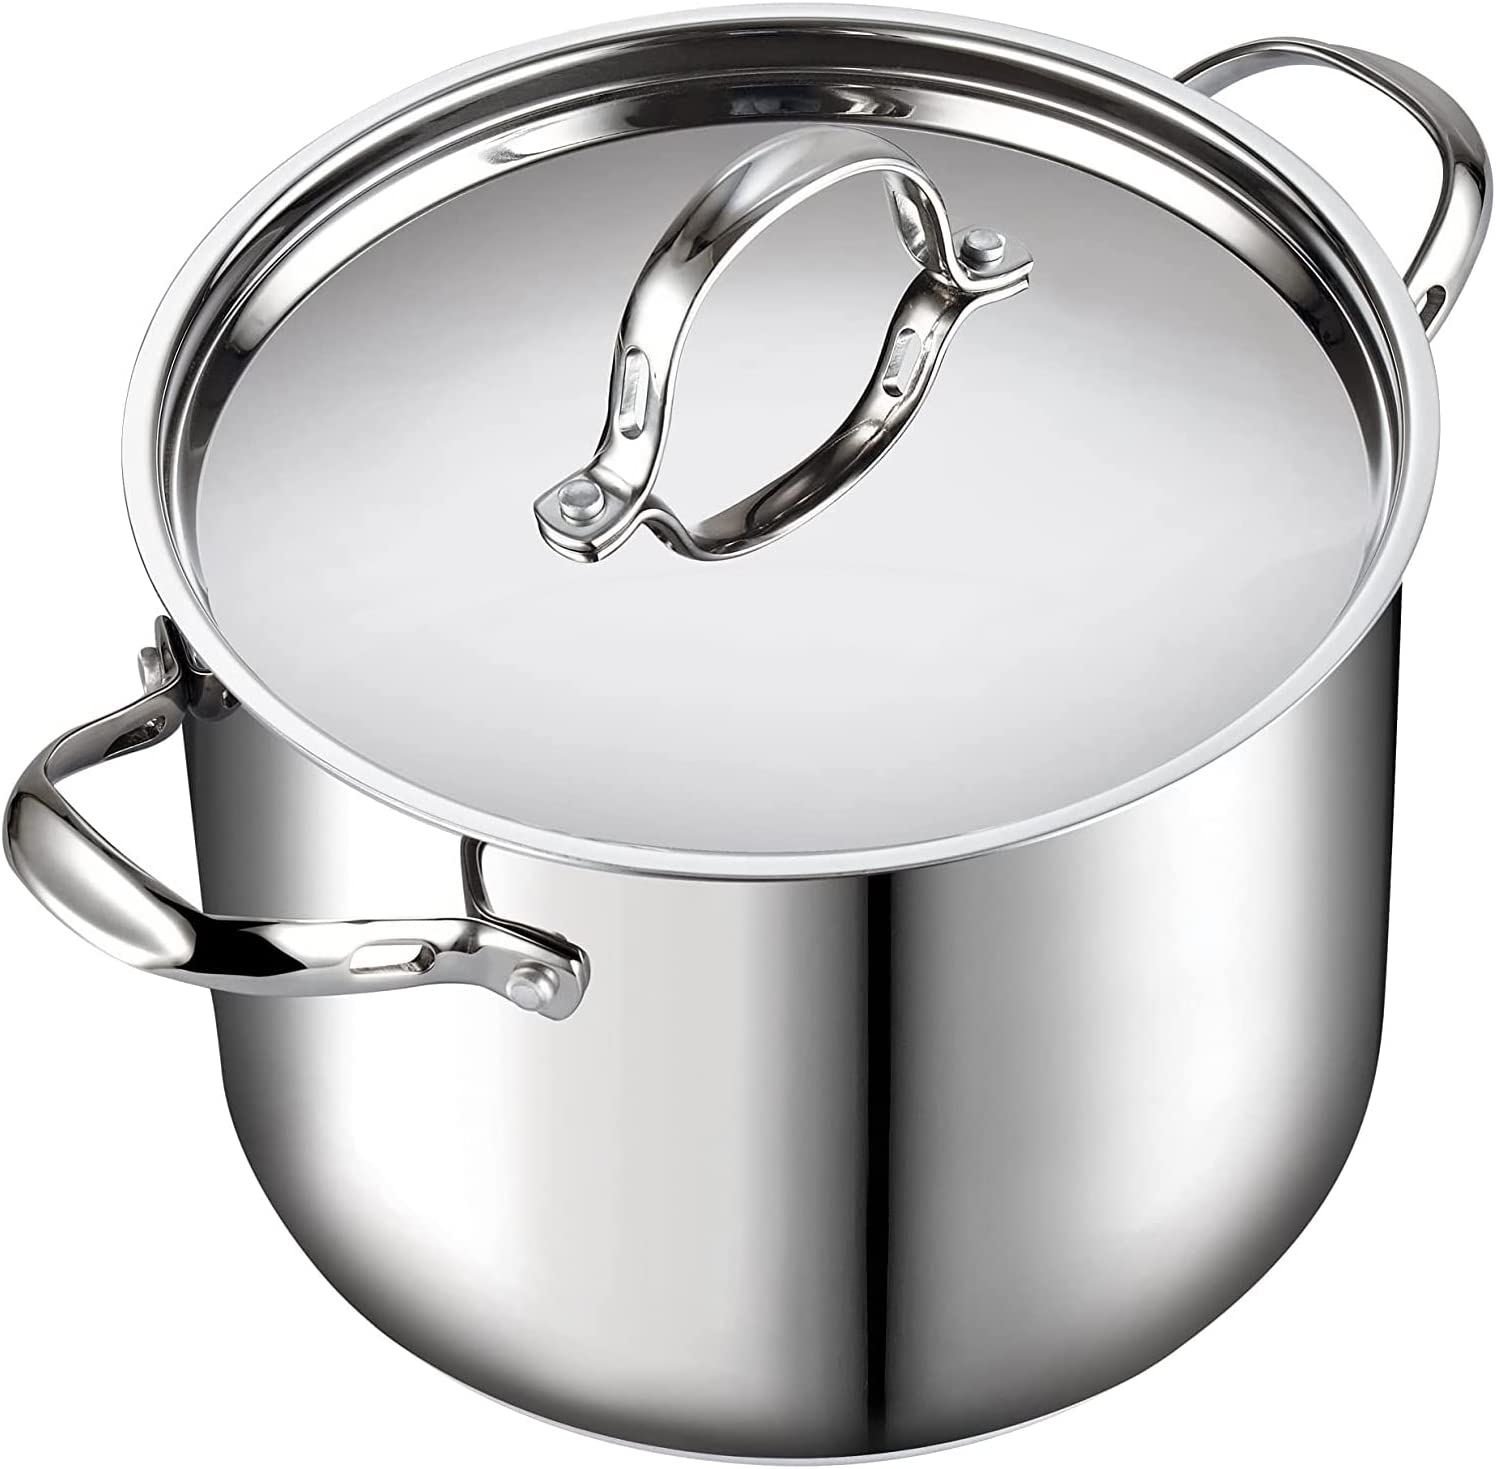 Cooks Standard 18/10 Stainless Steel Stockpot 6-Quart, Classic Deep Cooking  Pot Canning Cookware Dutch Oven Casserole with Stainless Steel Lid, Silver